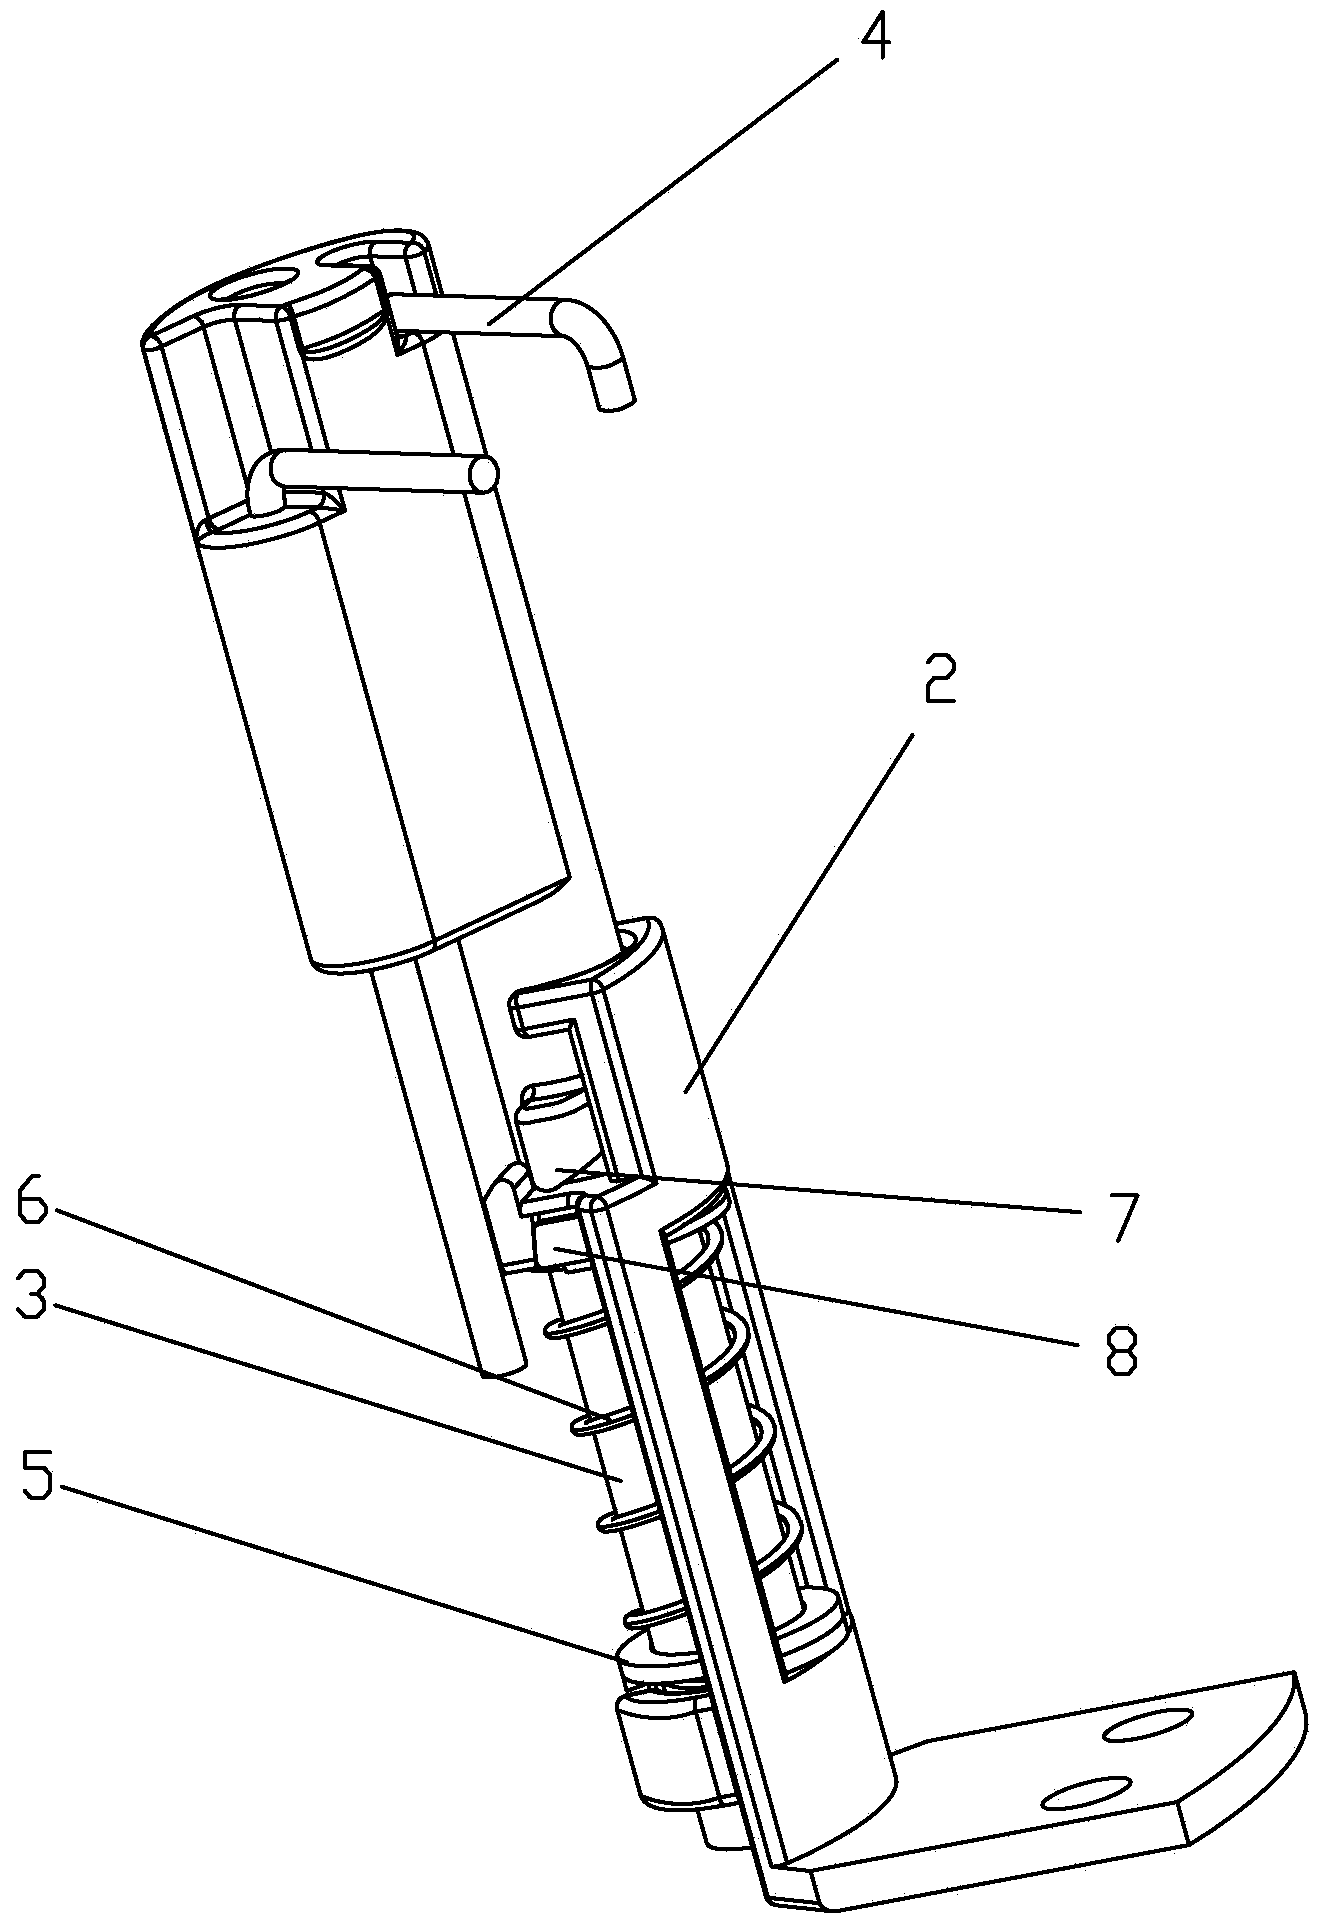 Mounting device for ignition needle